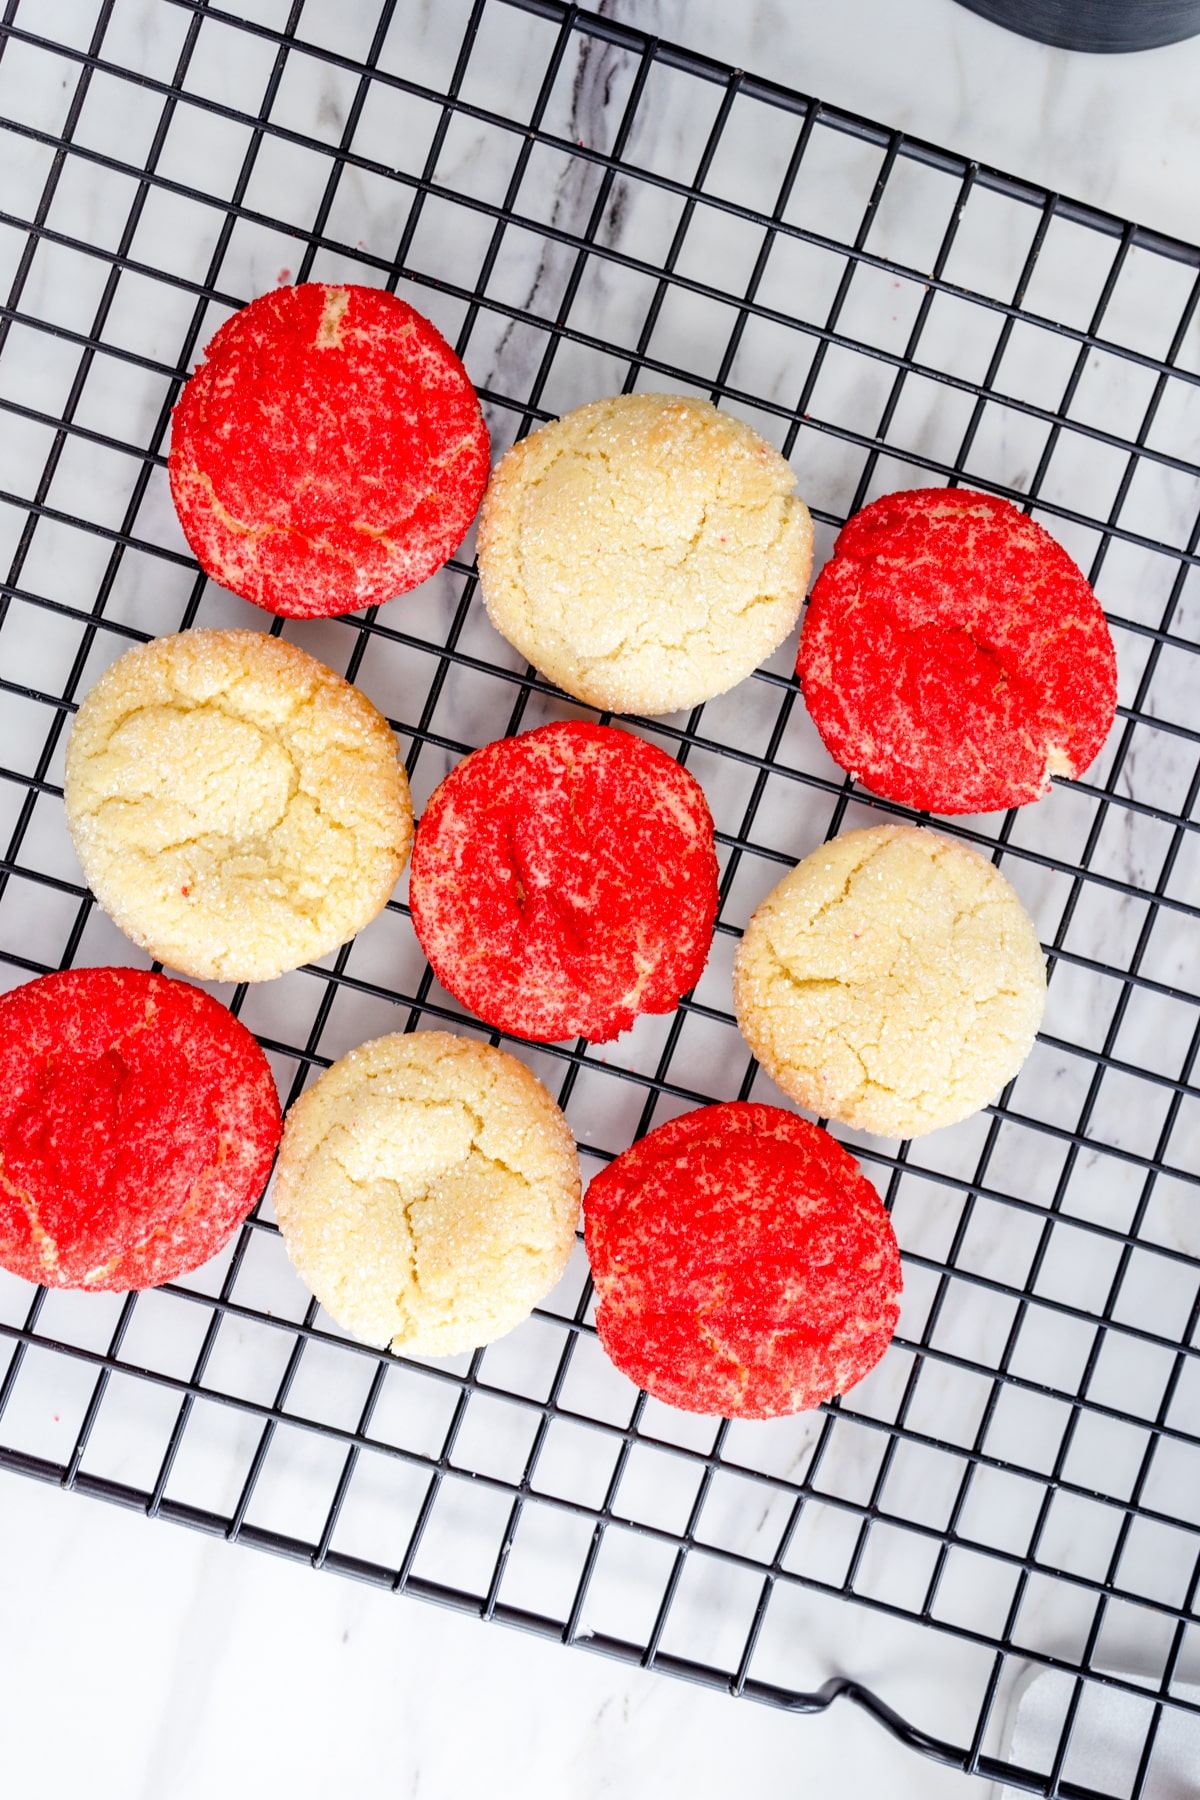 Top view of sugar cookies on a wire rack.